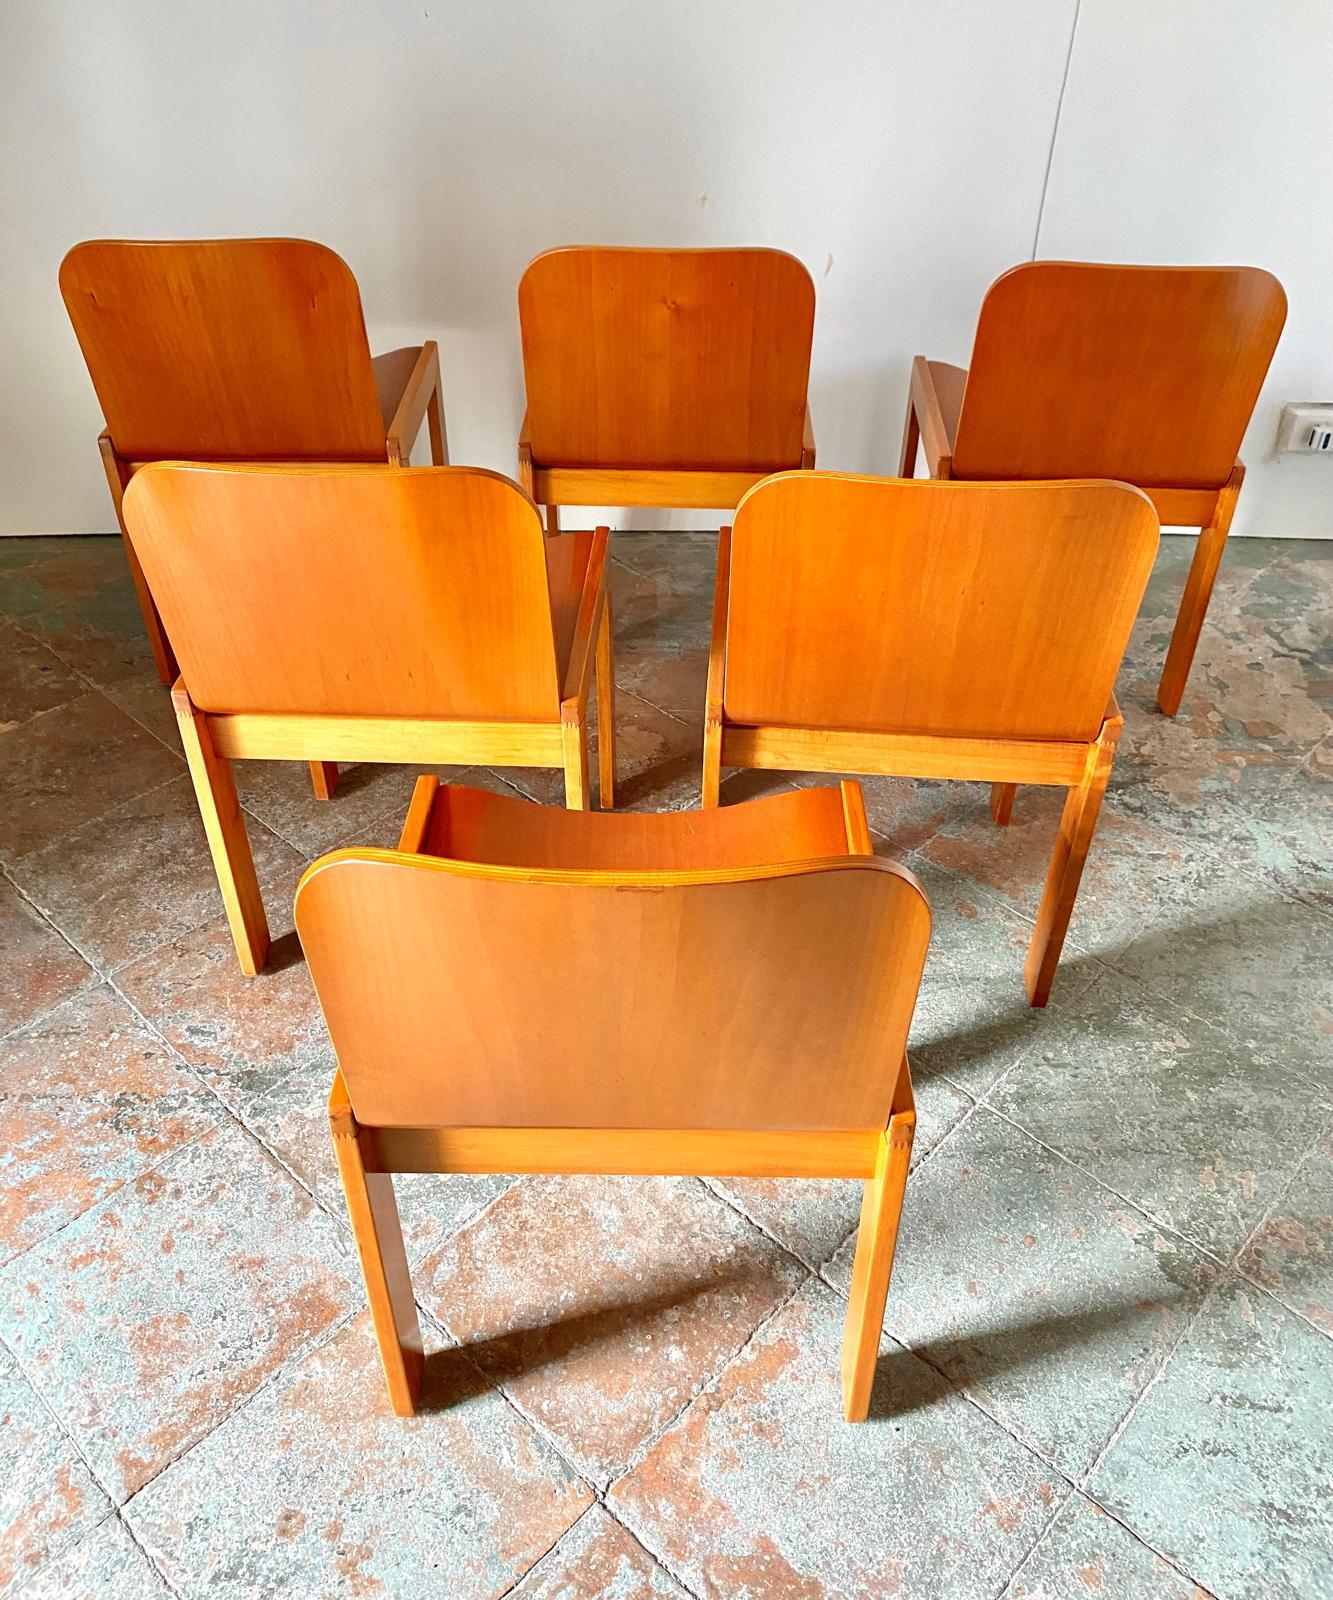 Italian Mid Century modern wood dining chairs, Afra and Tobia Scarpa for Molteni, Italy 